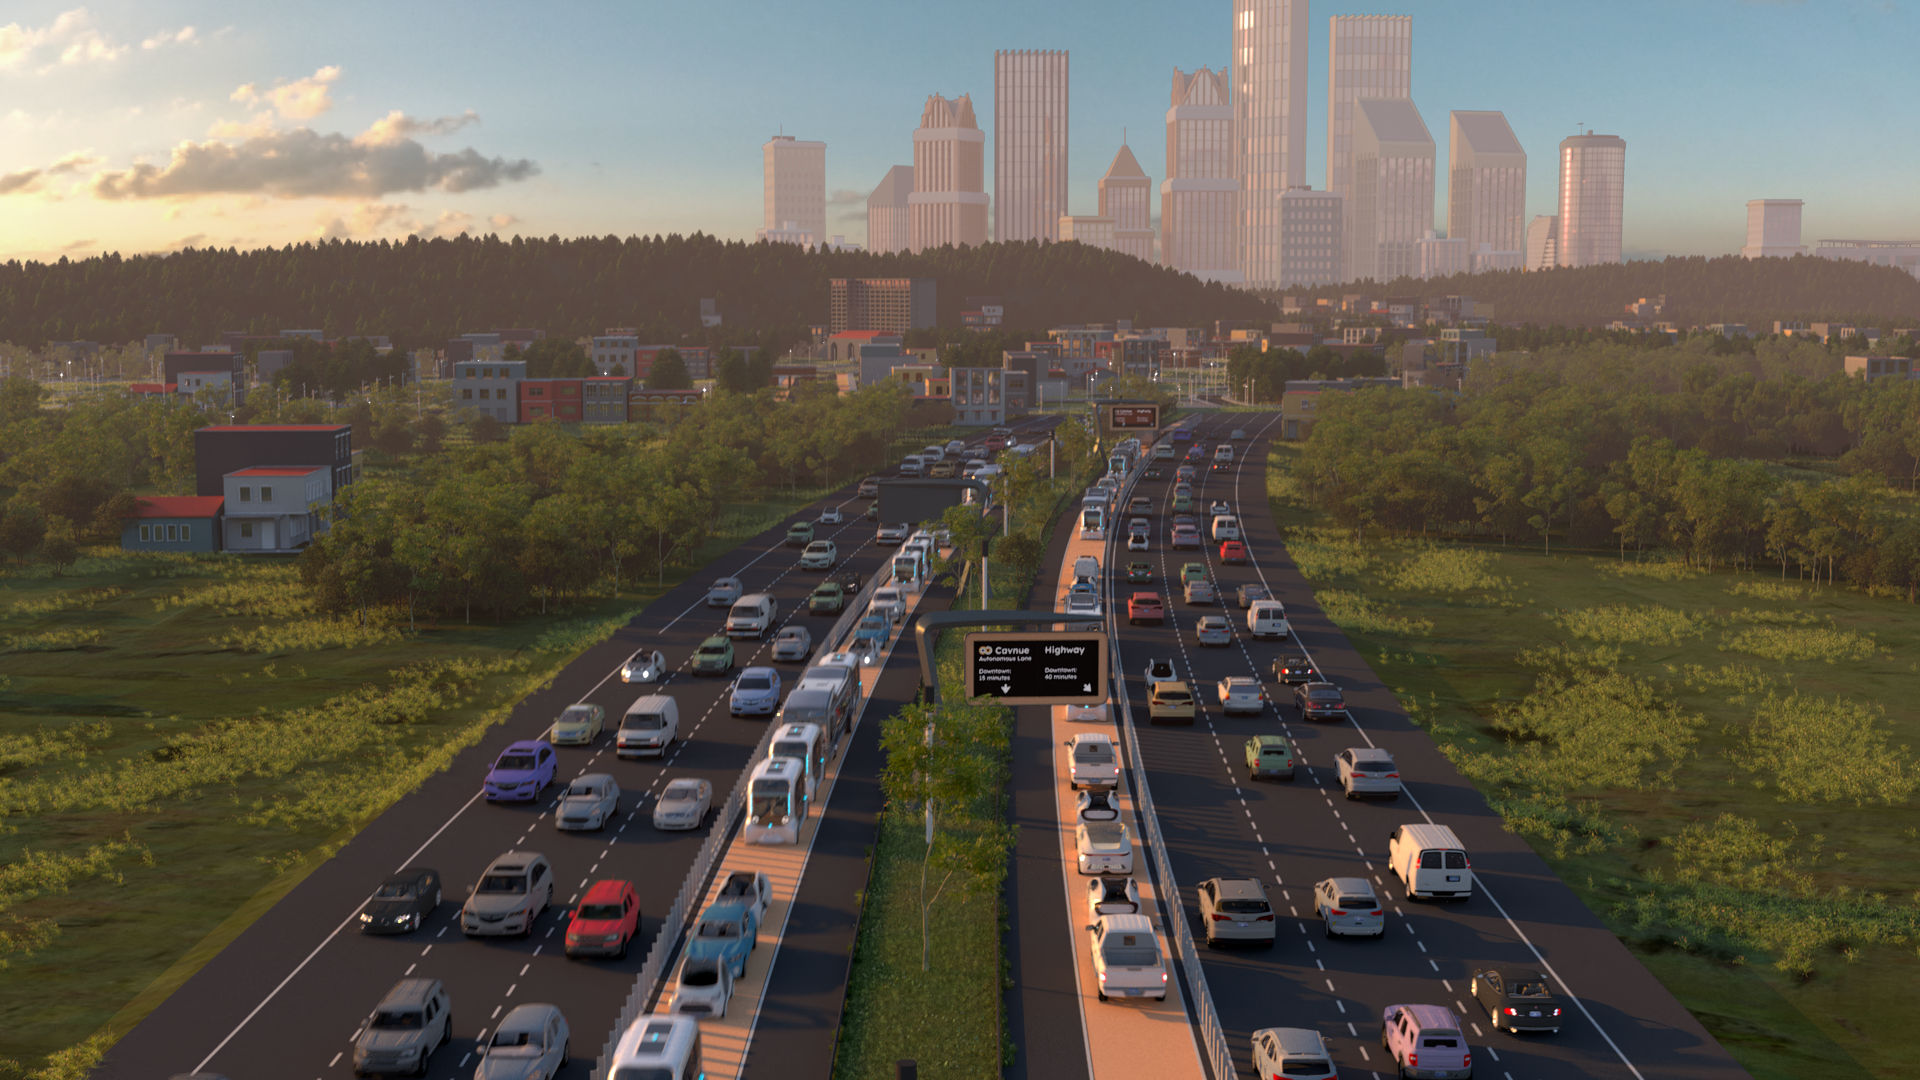 Rendering of a highway with dedicated lanes for automated cars, trucks and buses